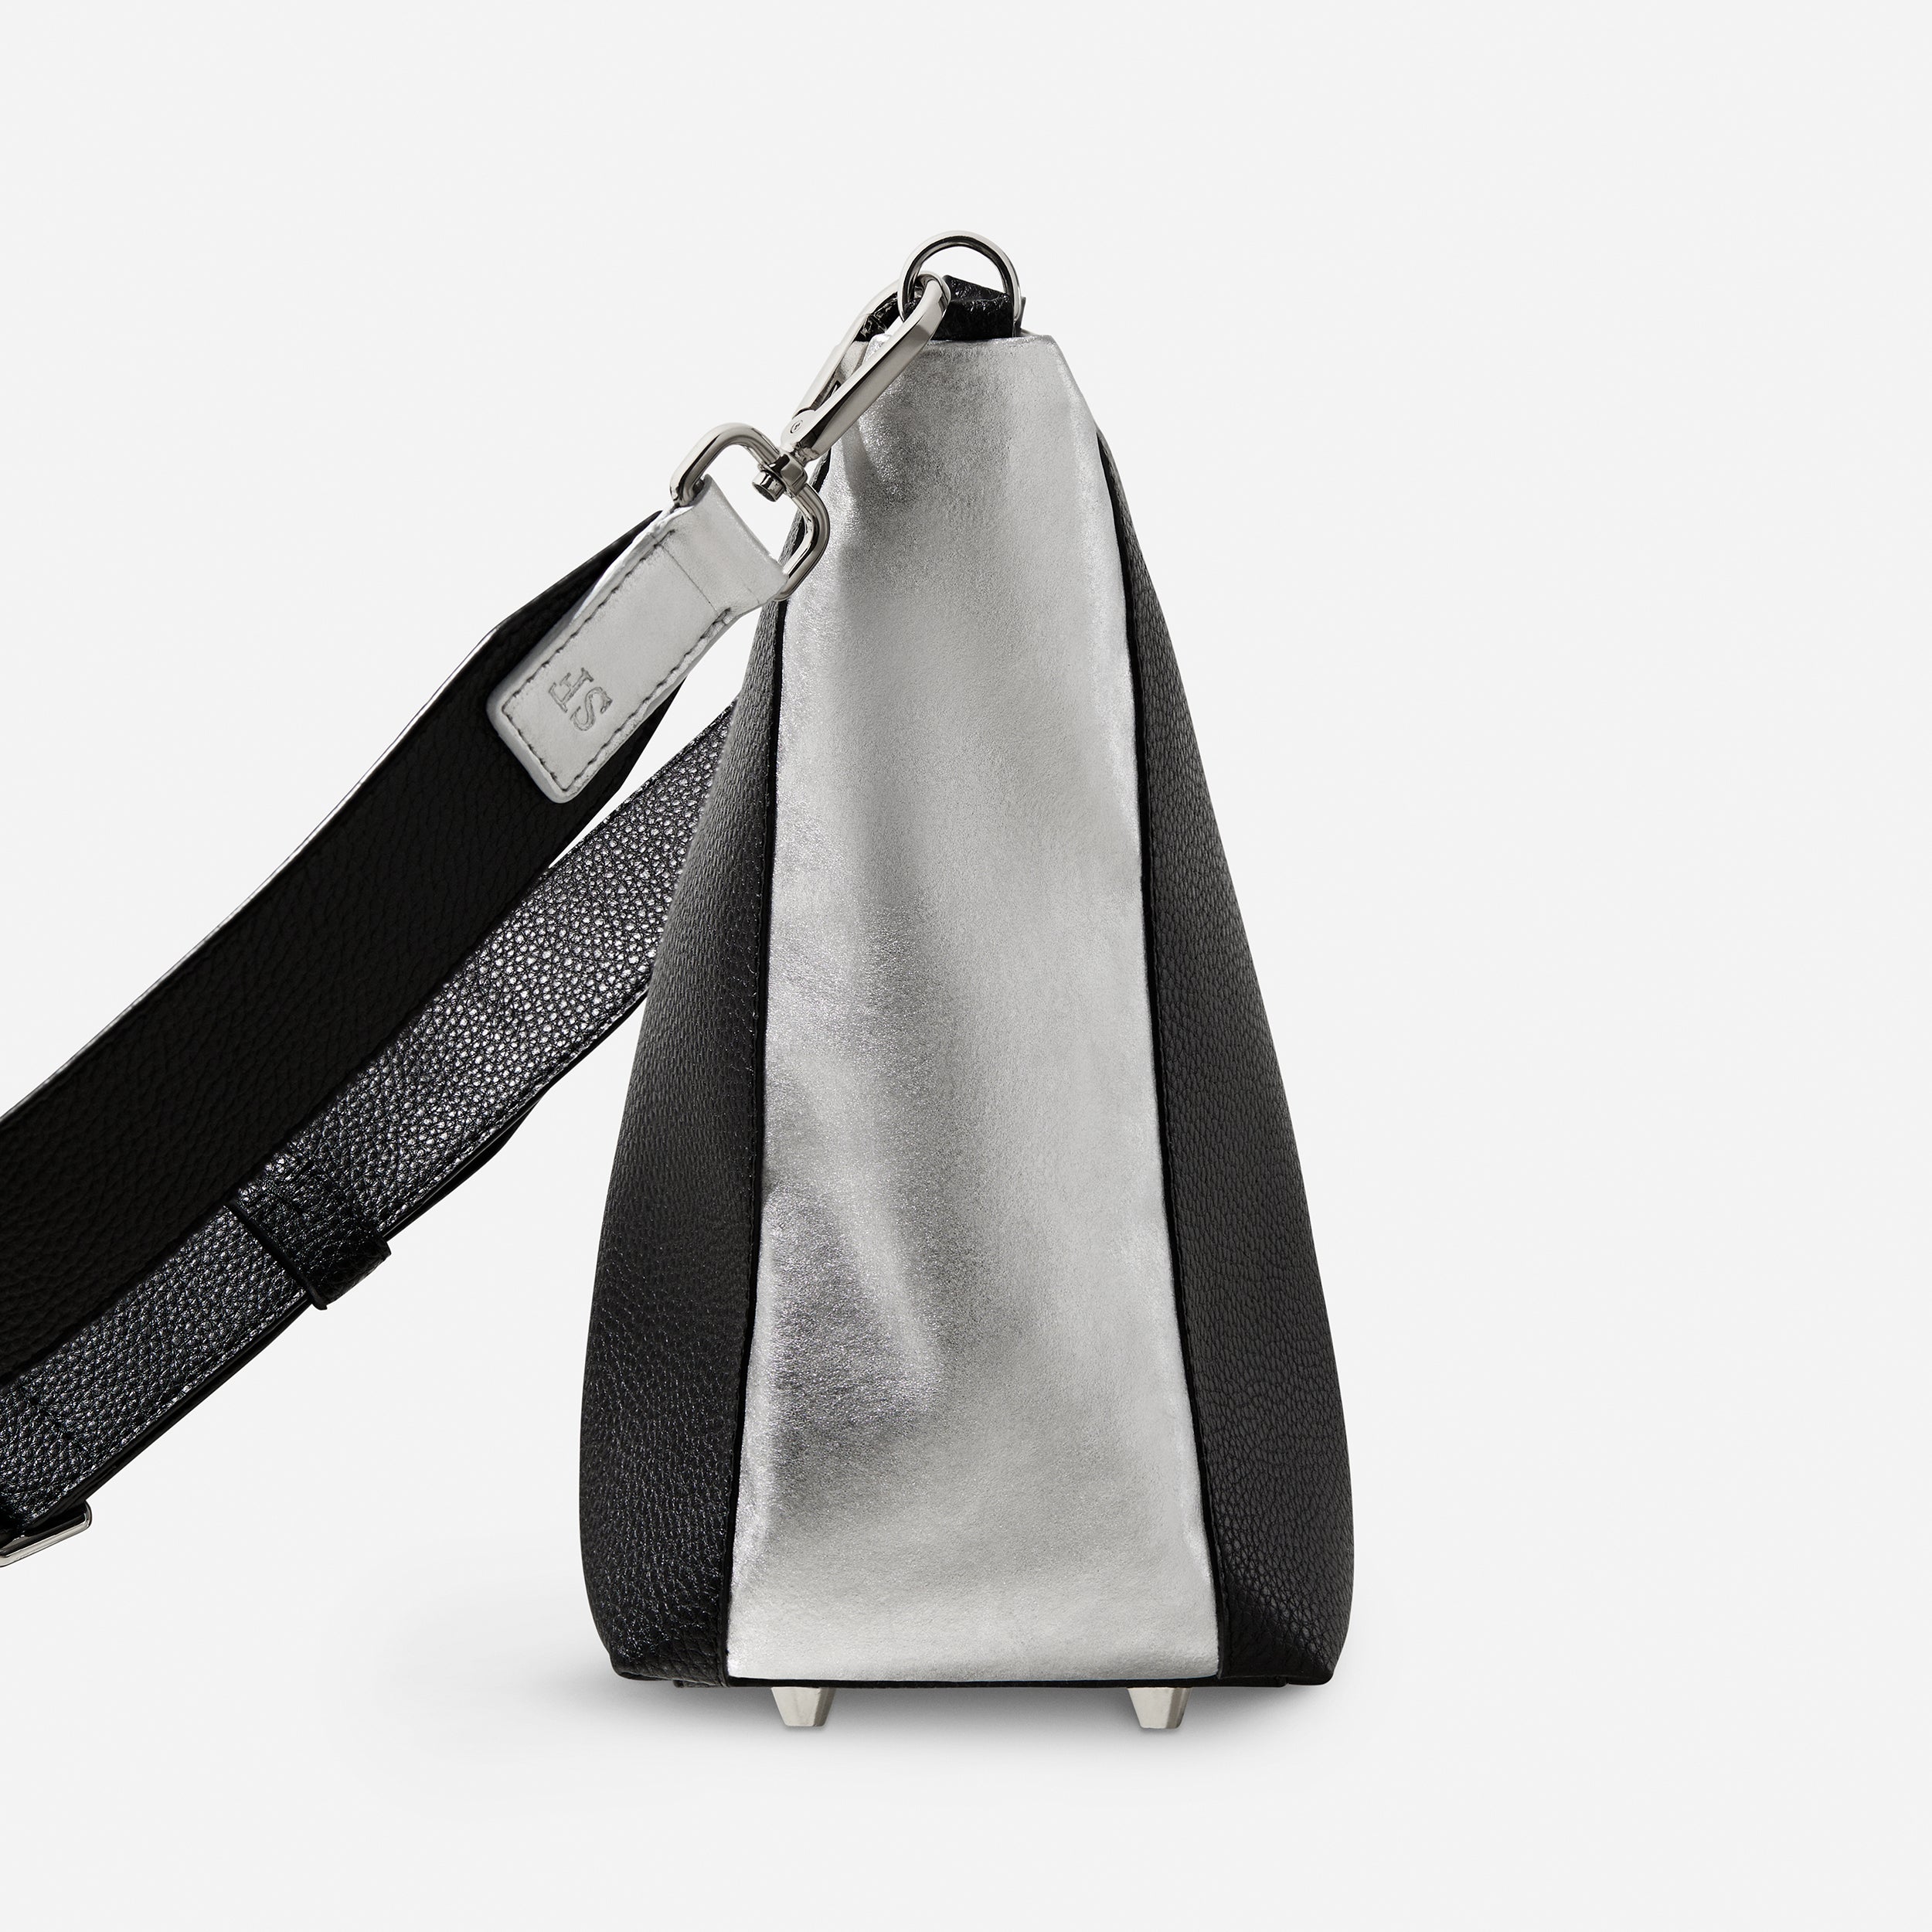 Mel x BEEN London crossbody Black Silver Complimentary personalisation on side strap